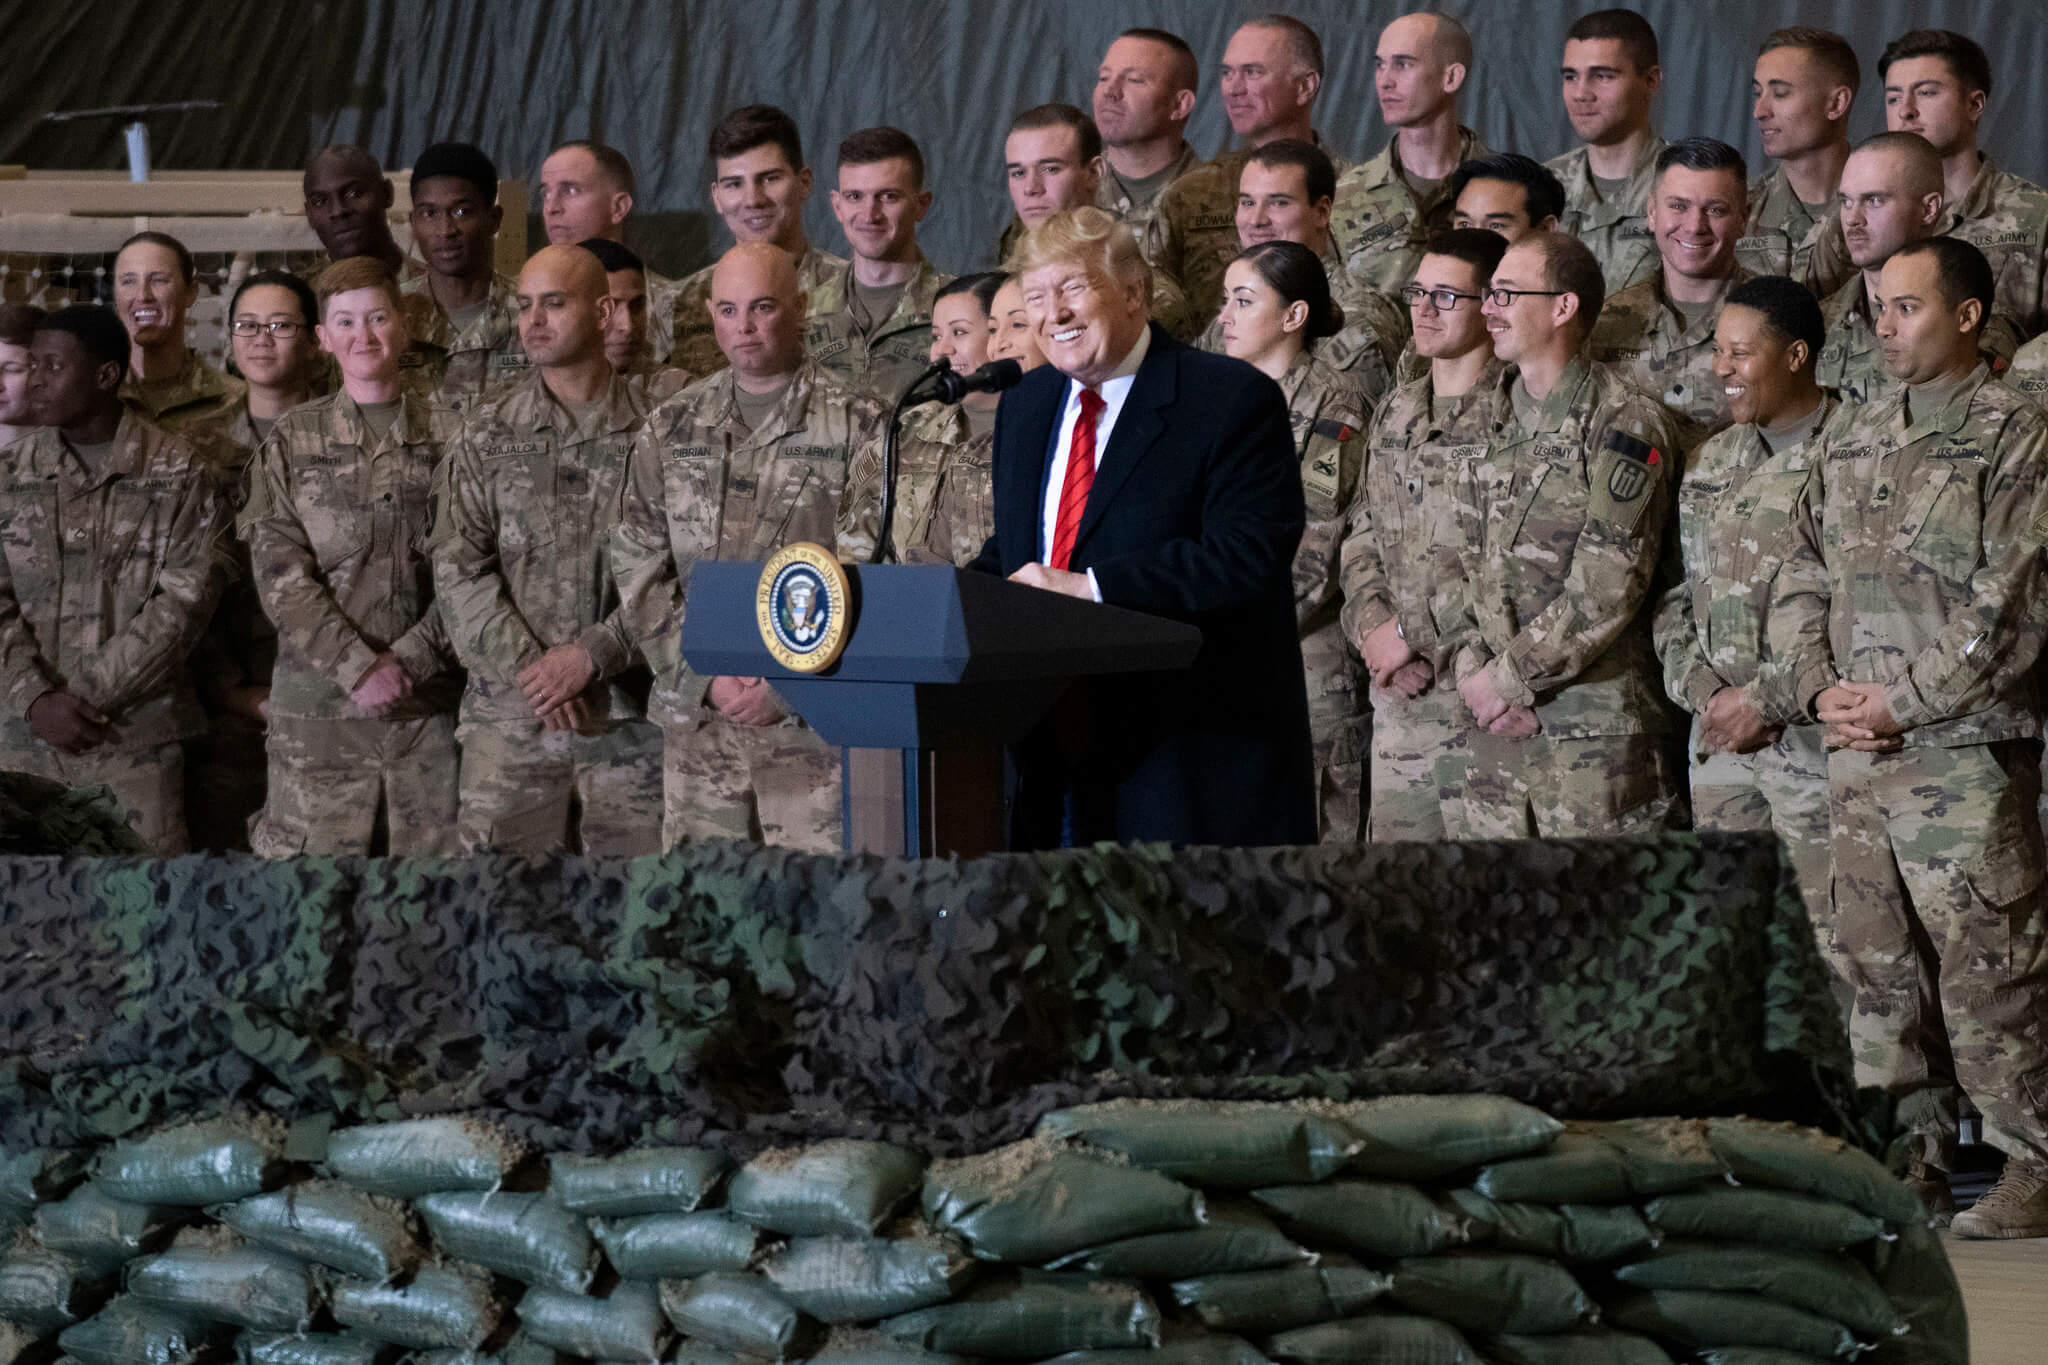 Klijn-President of the United States Donald J. Trump meet with service members at Bagram Airfield in Afghanistan in November 2019. Chairman of the Joint Chiefs of Staff 